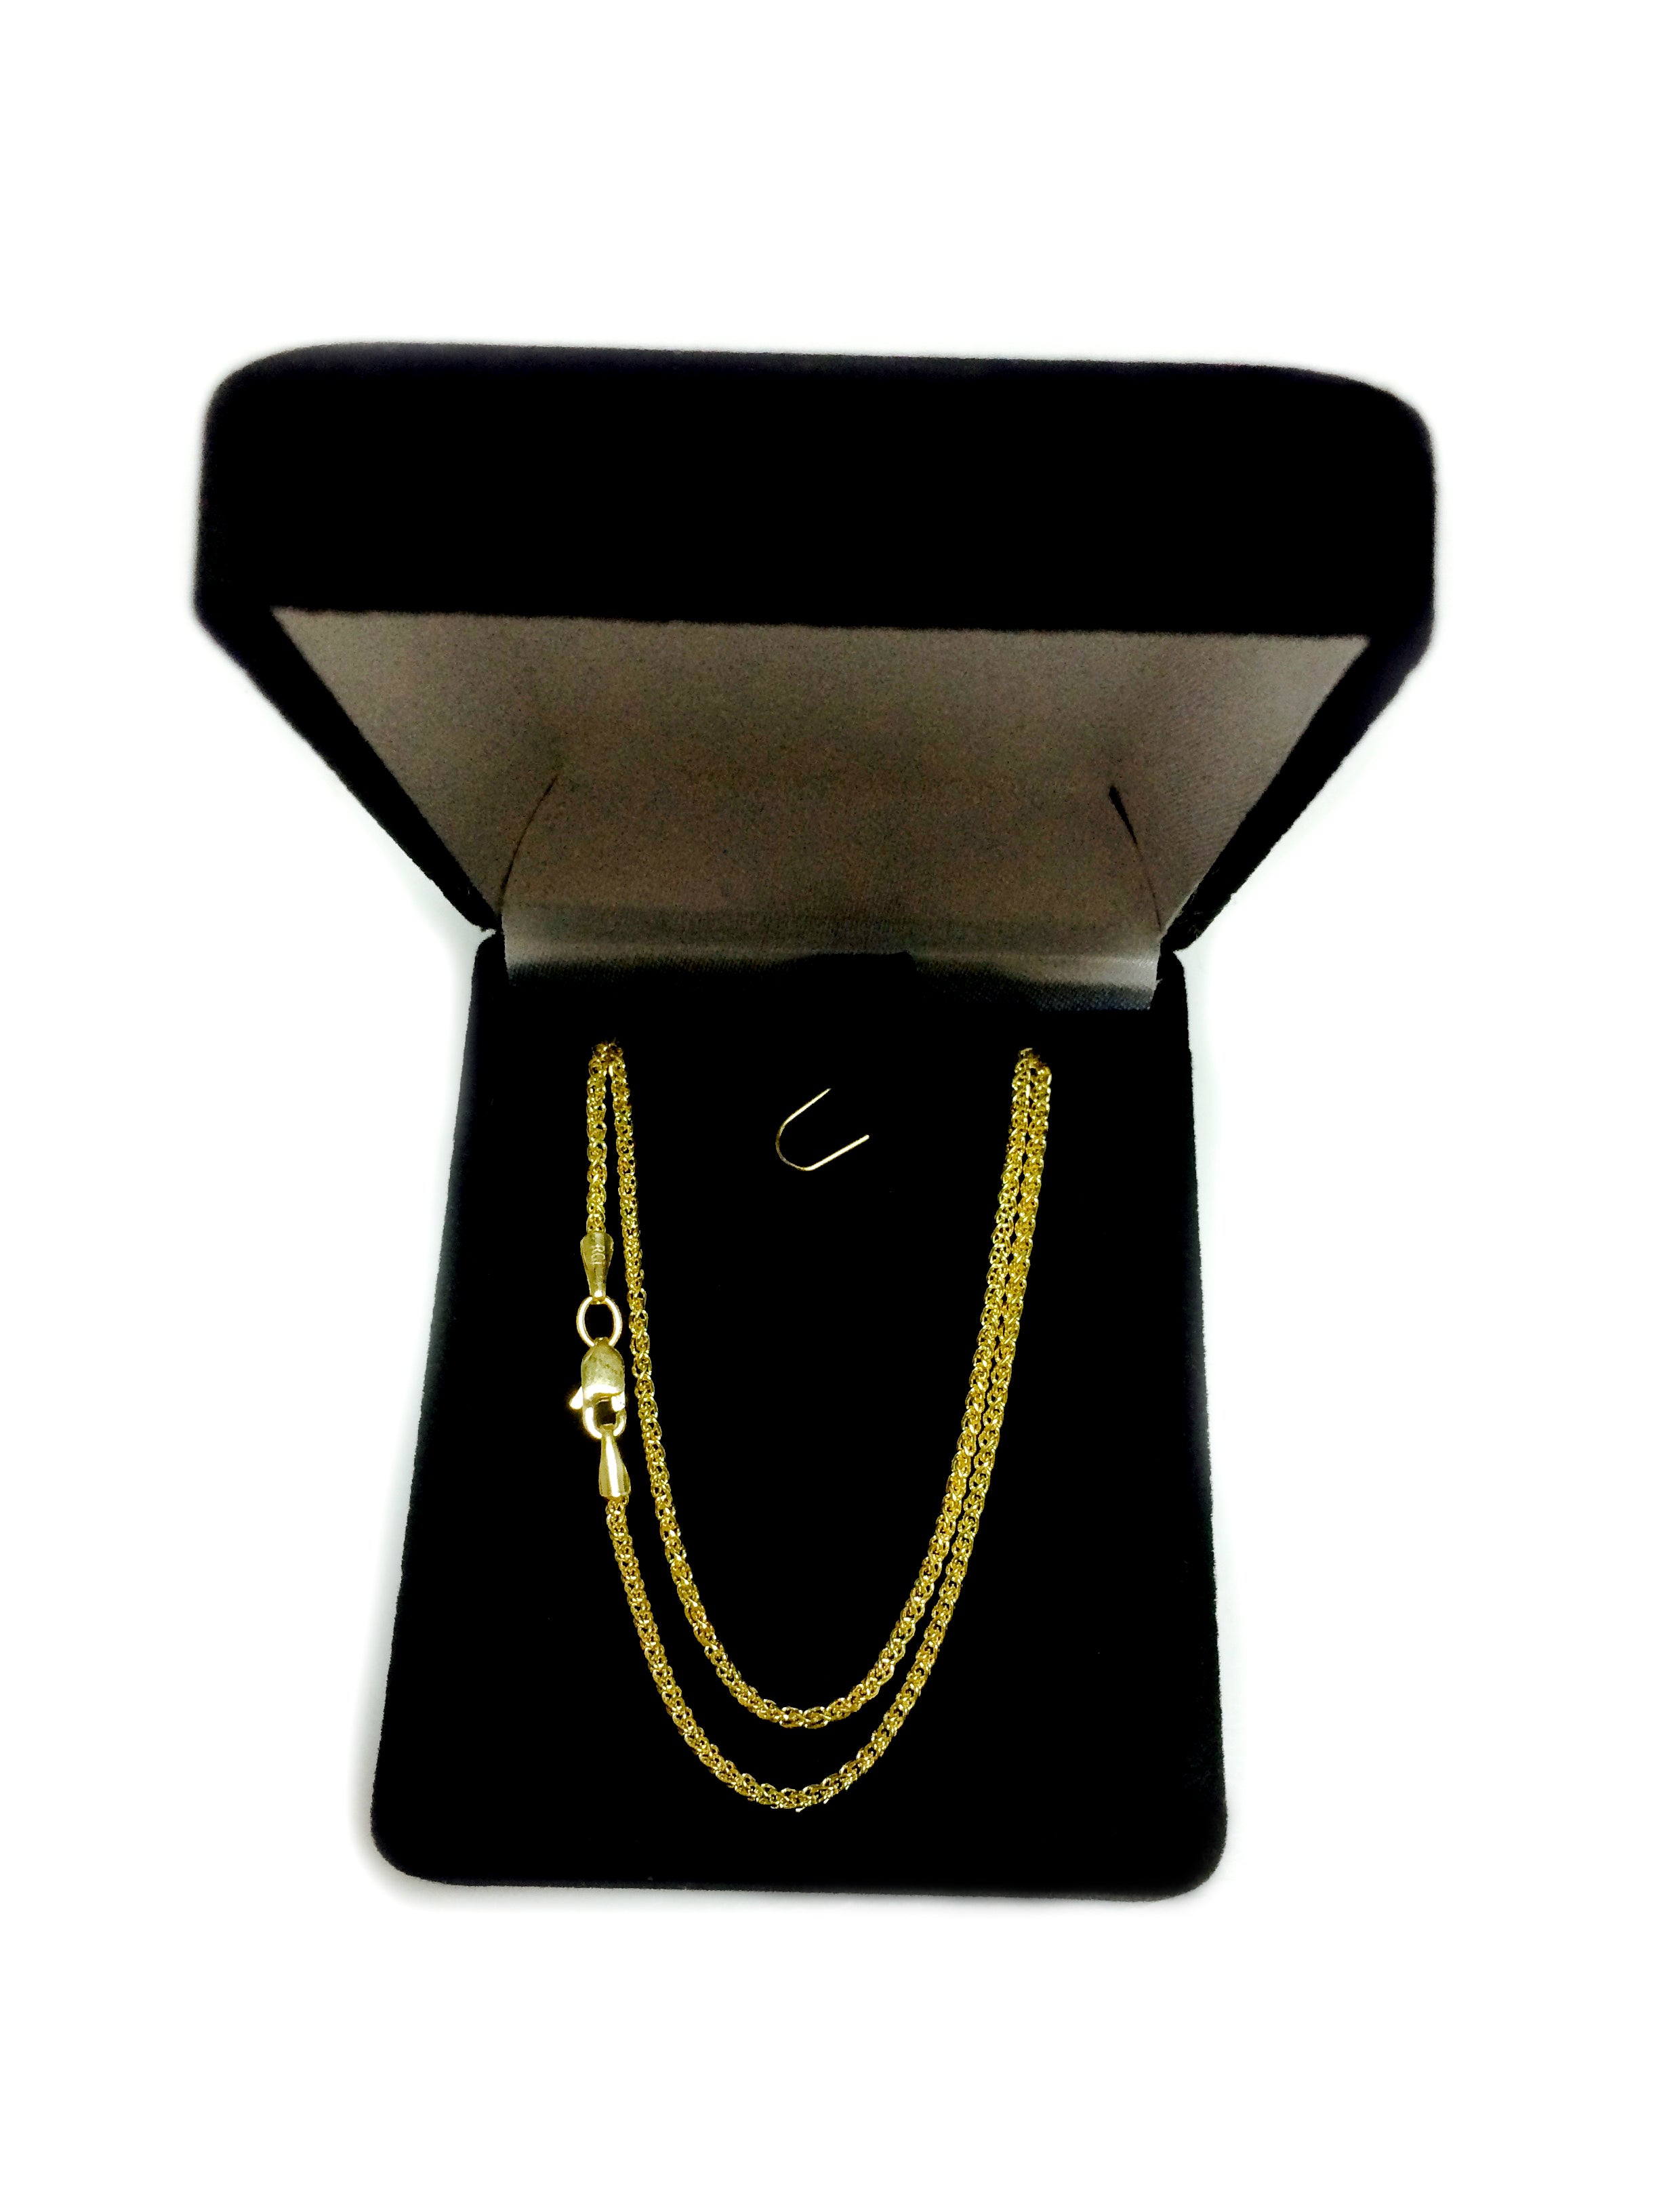 14k Yellow Gold Round Wheat Chain Necklace, 1.5mm fine designer jewelry for men and women